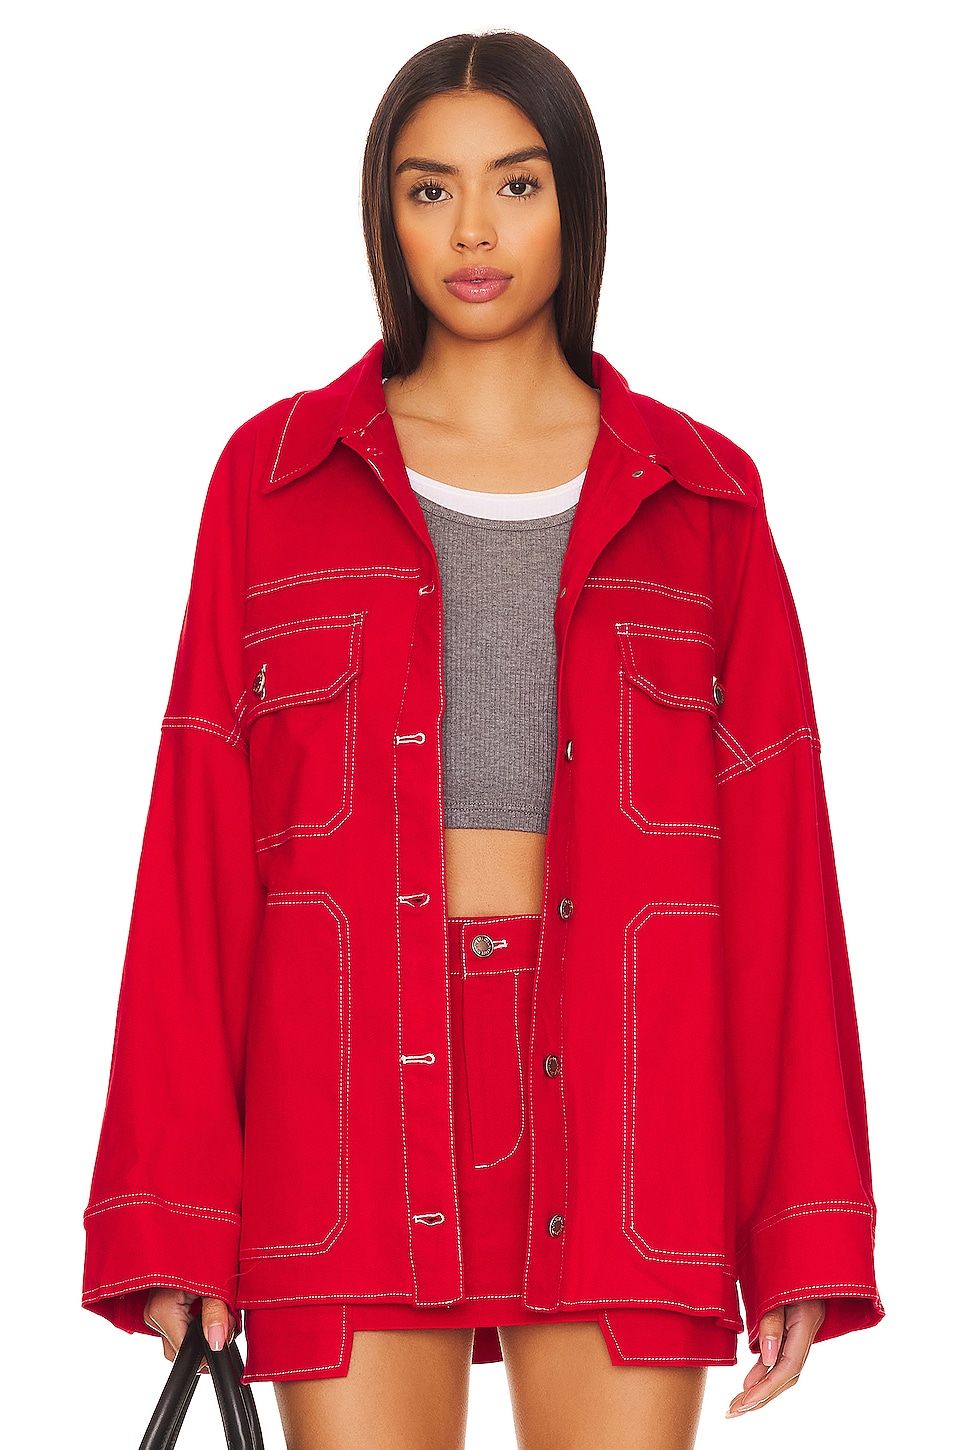 BY.DYLN x REVOLVE Cooper Jacket in Red | REVOLVE